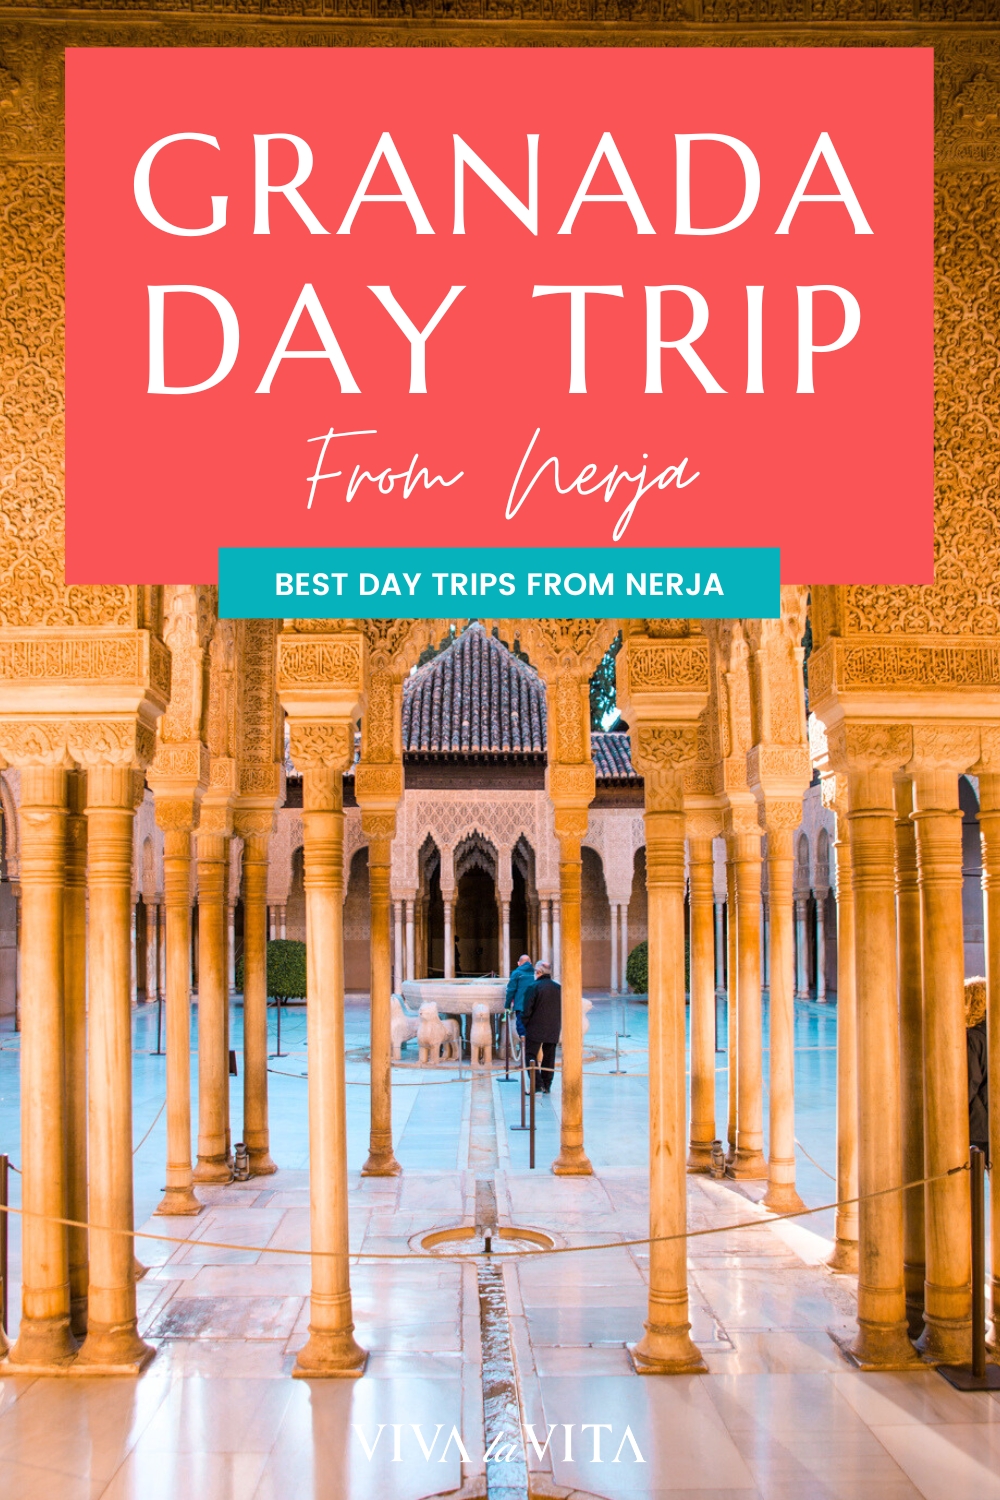 Pinterest image showing the courtyard of the lions at the Alhambra palace in Granada, with a headline - Granada day trip from Nerja, Best Day Trips from Nerja